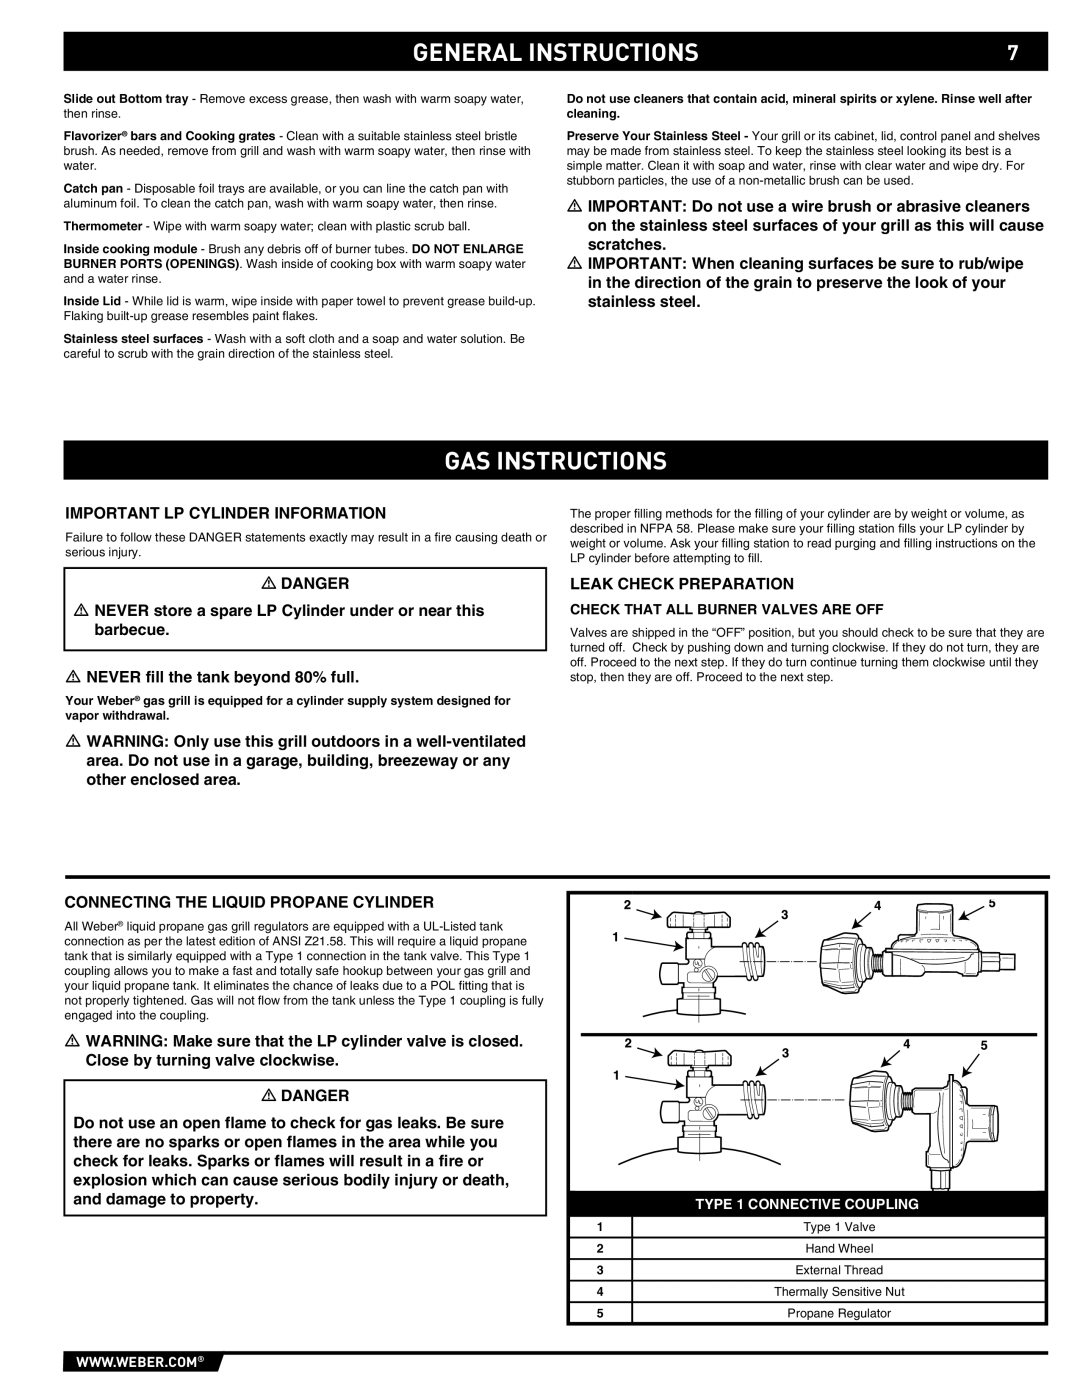 Summit 89190 Gas Instructions, General Instructions, Check That All Burner Valves Are Off, TYPE 1 CONNECTIVE COUPLING 